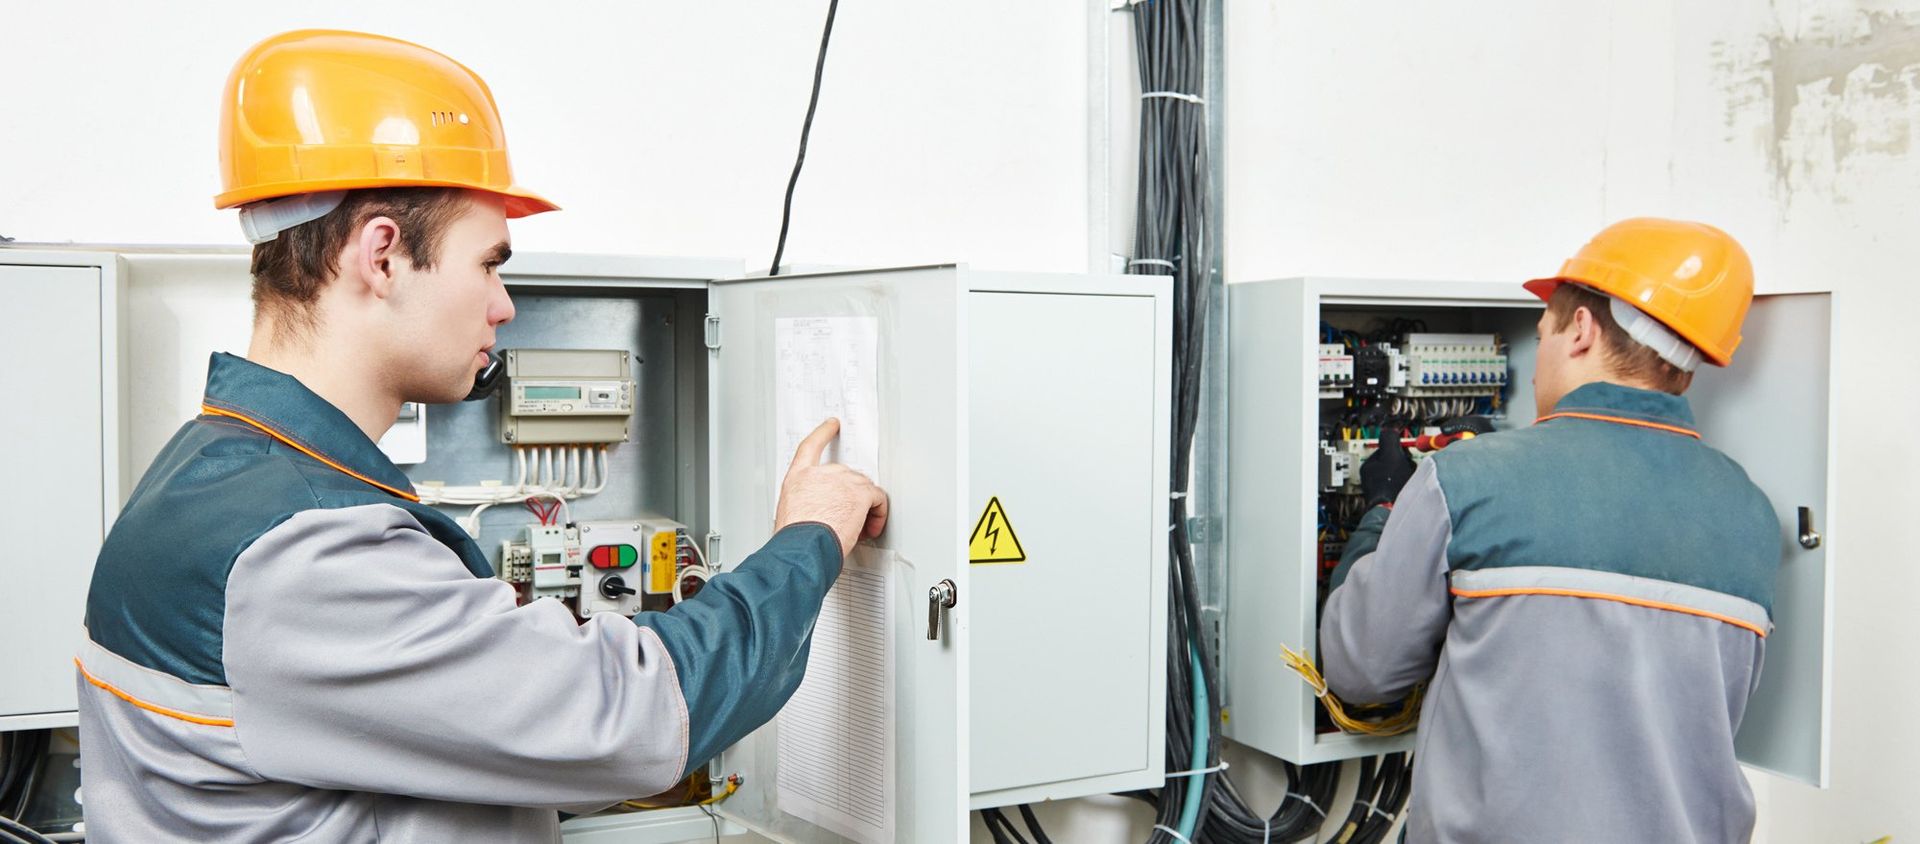 Trusted electricians provide safe and functional service to stay connected in Napier